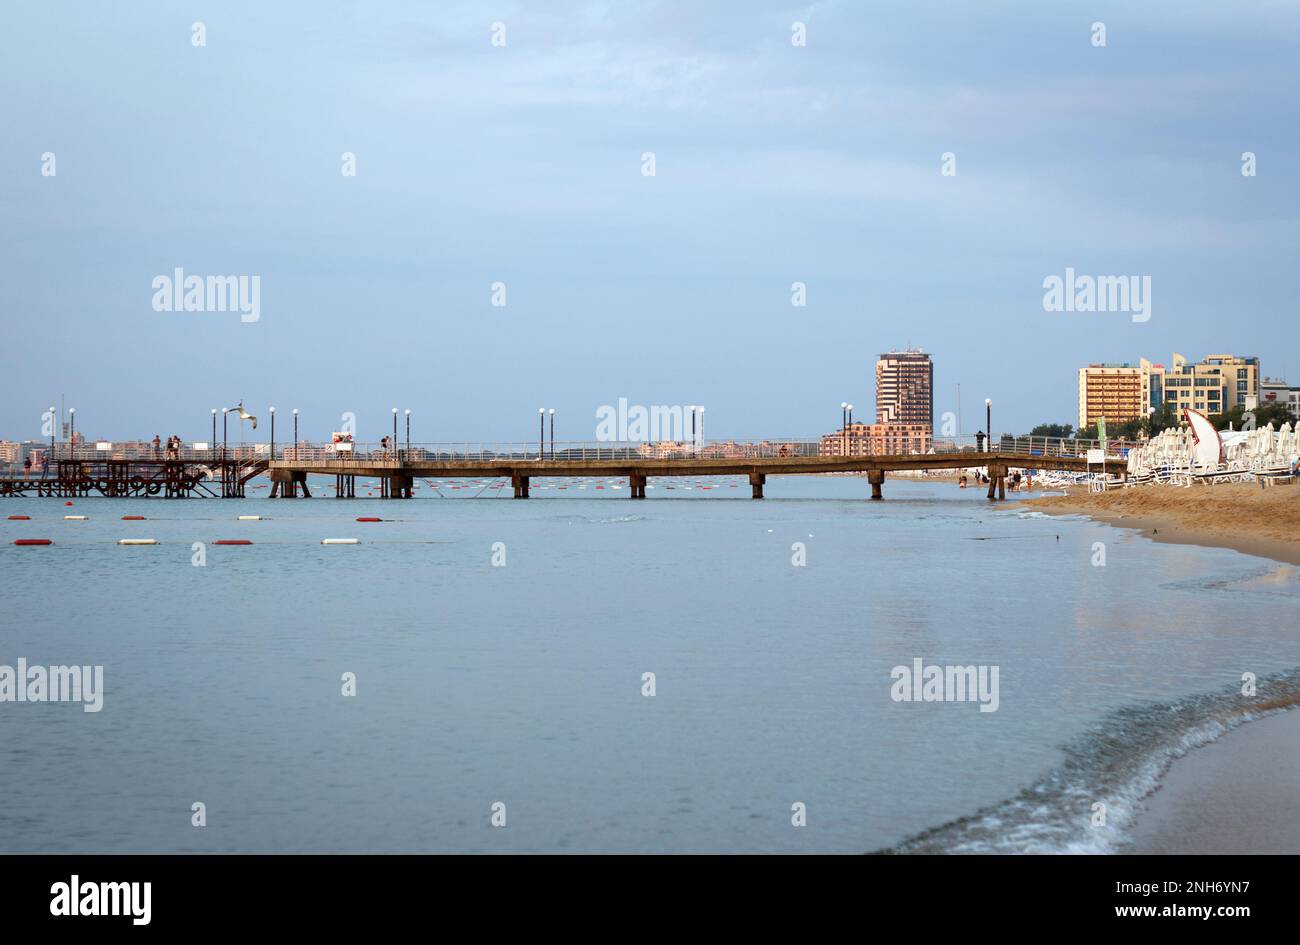 SUNNY BEACH, BULGARIA - JUNE 25, 2015: Landscape, a very early morning, empty seashore that seamlessly crosses the pier going into the sea, against  b Stock Photo